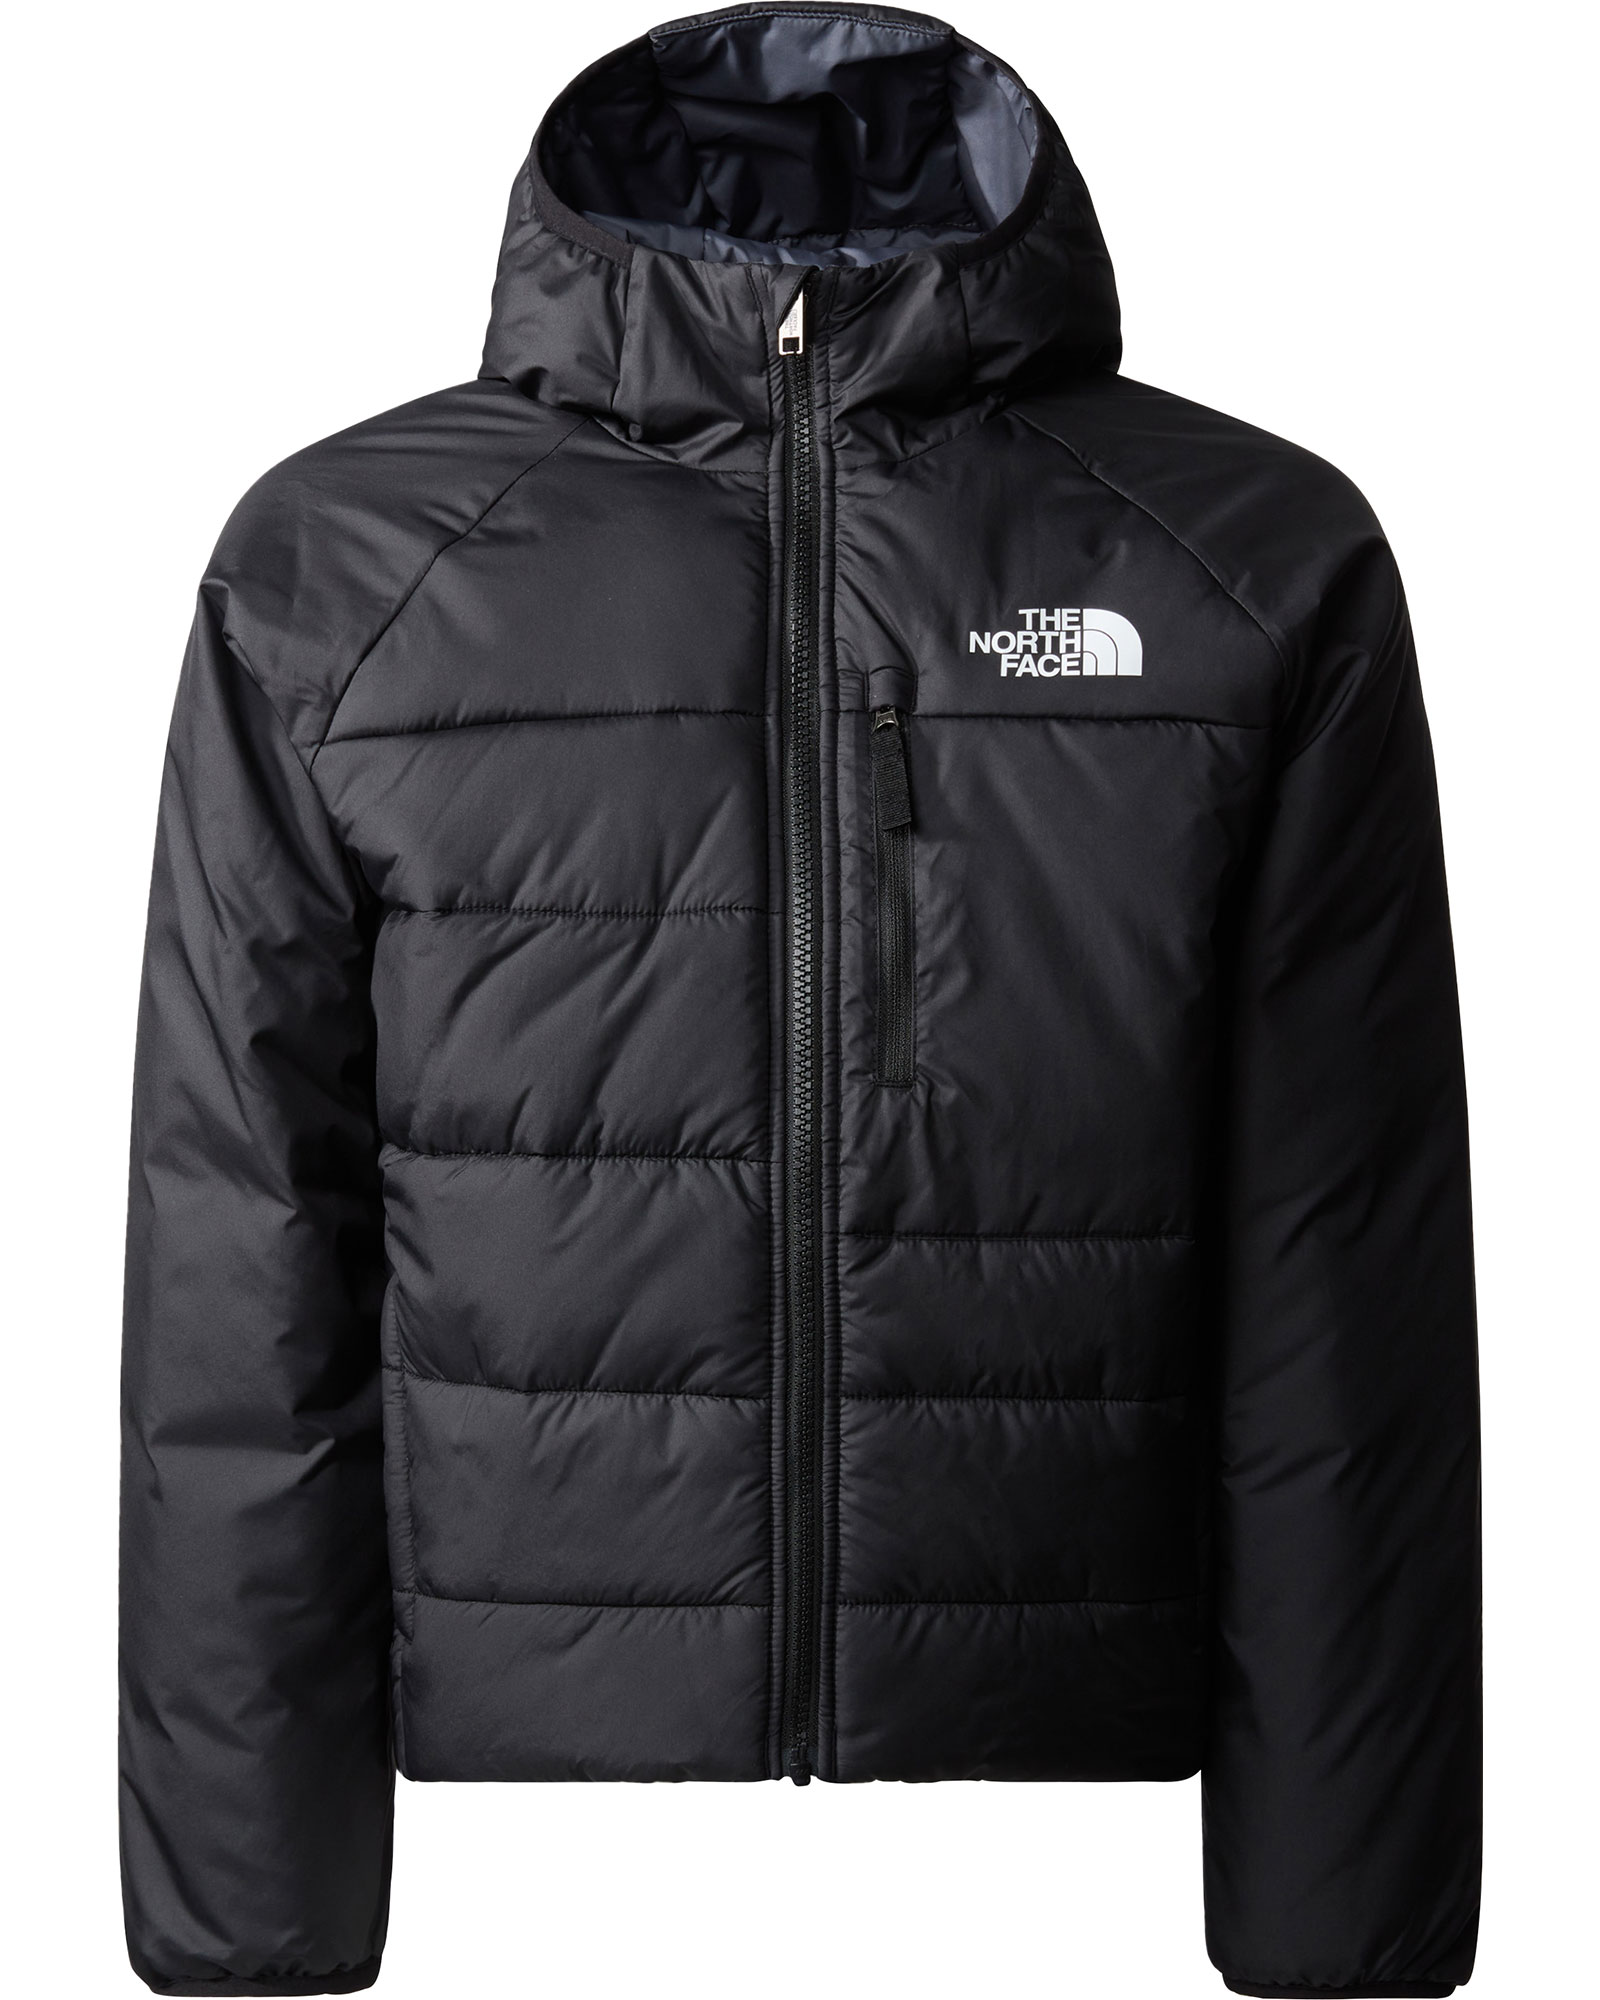 The North Face Boy's Reversible Perrito Insulated Jacket XL